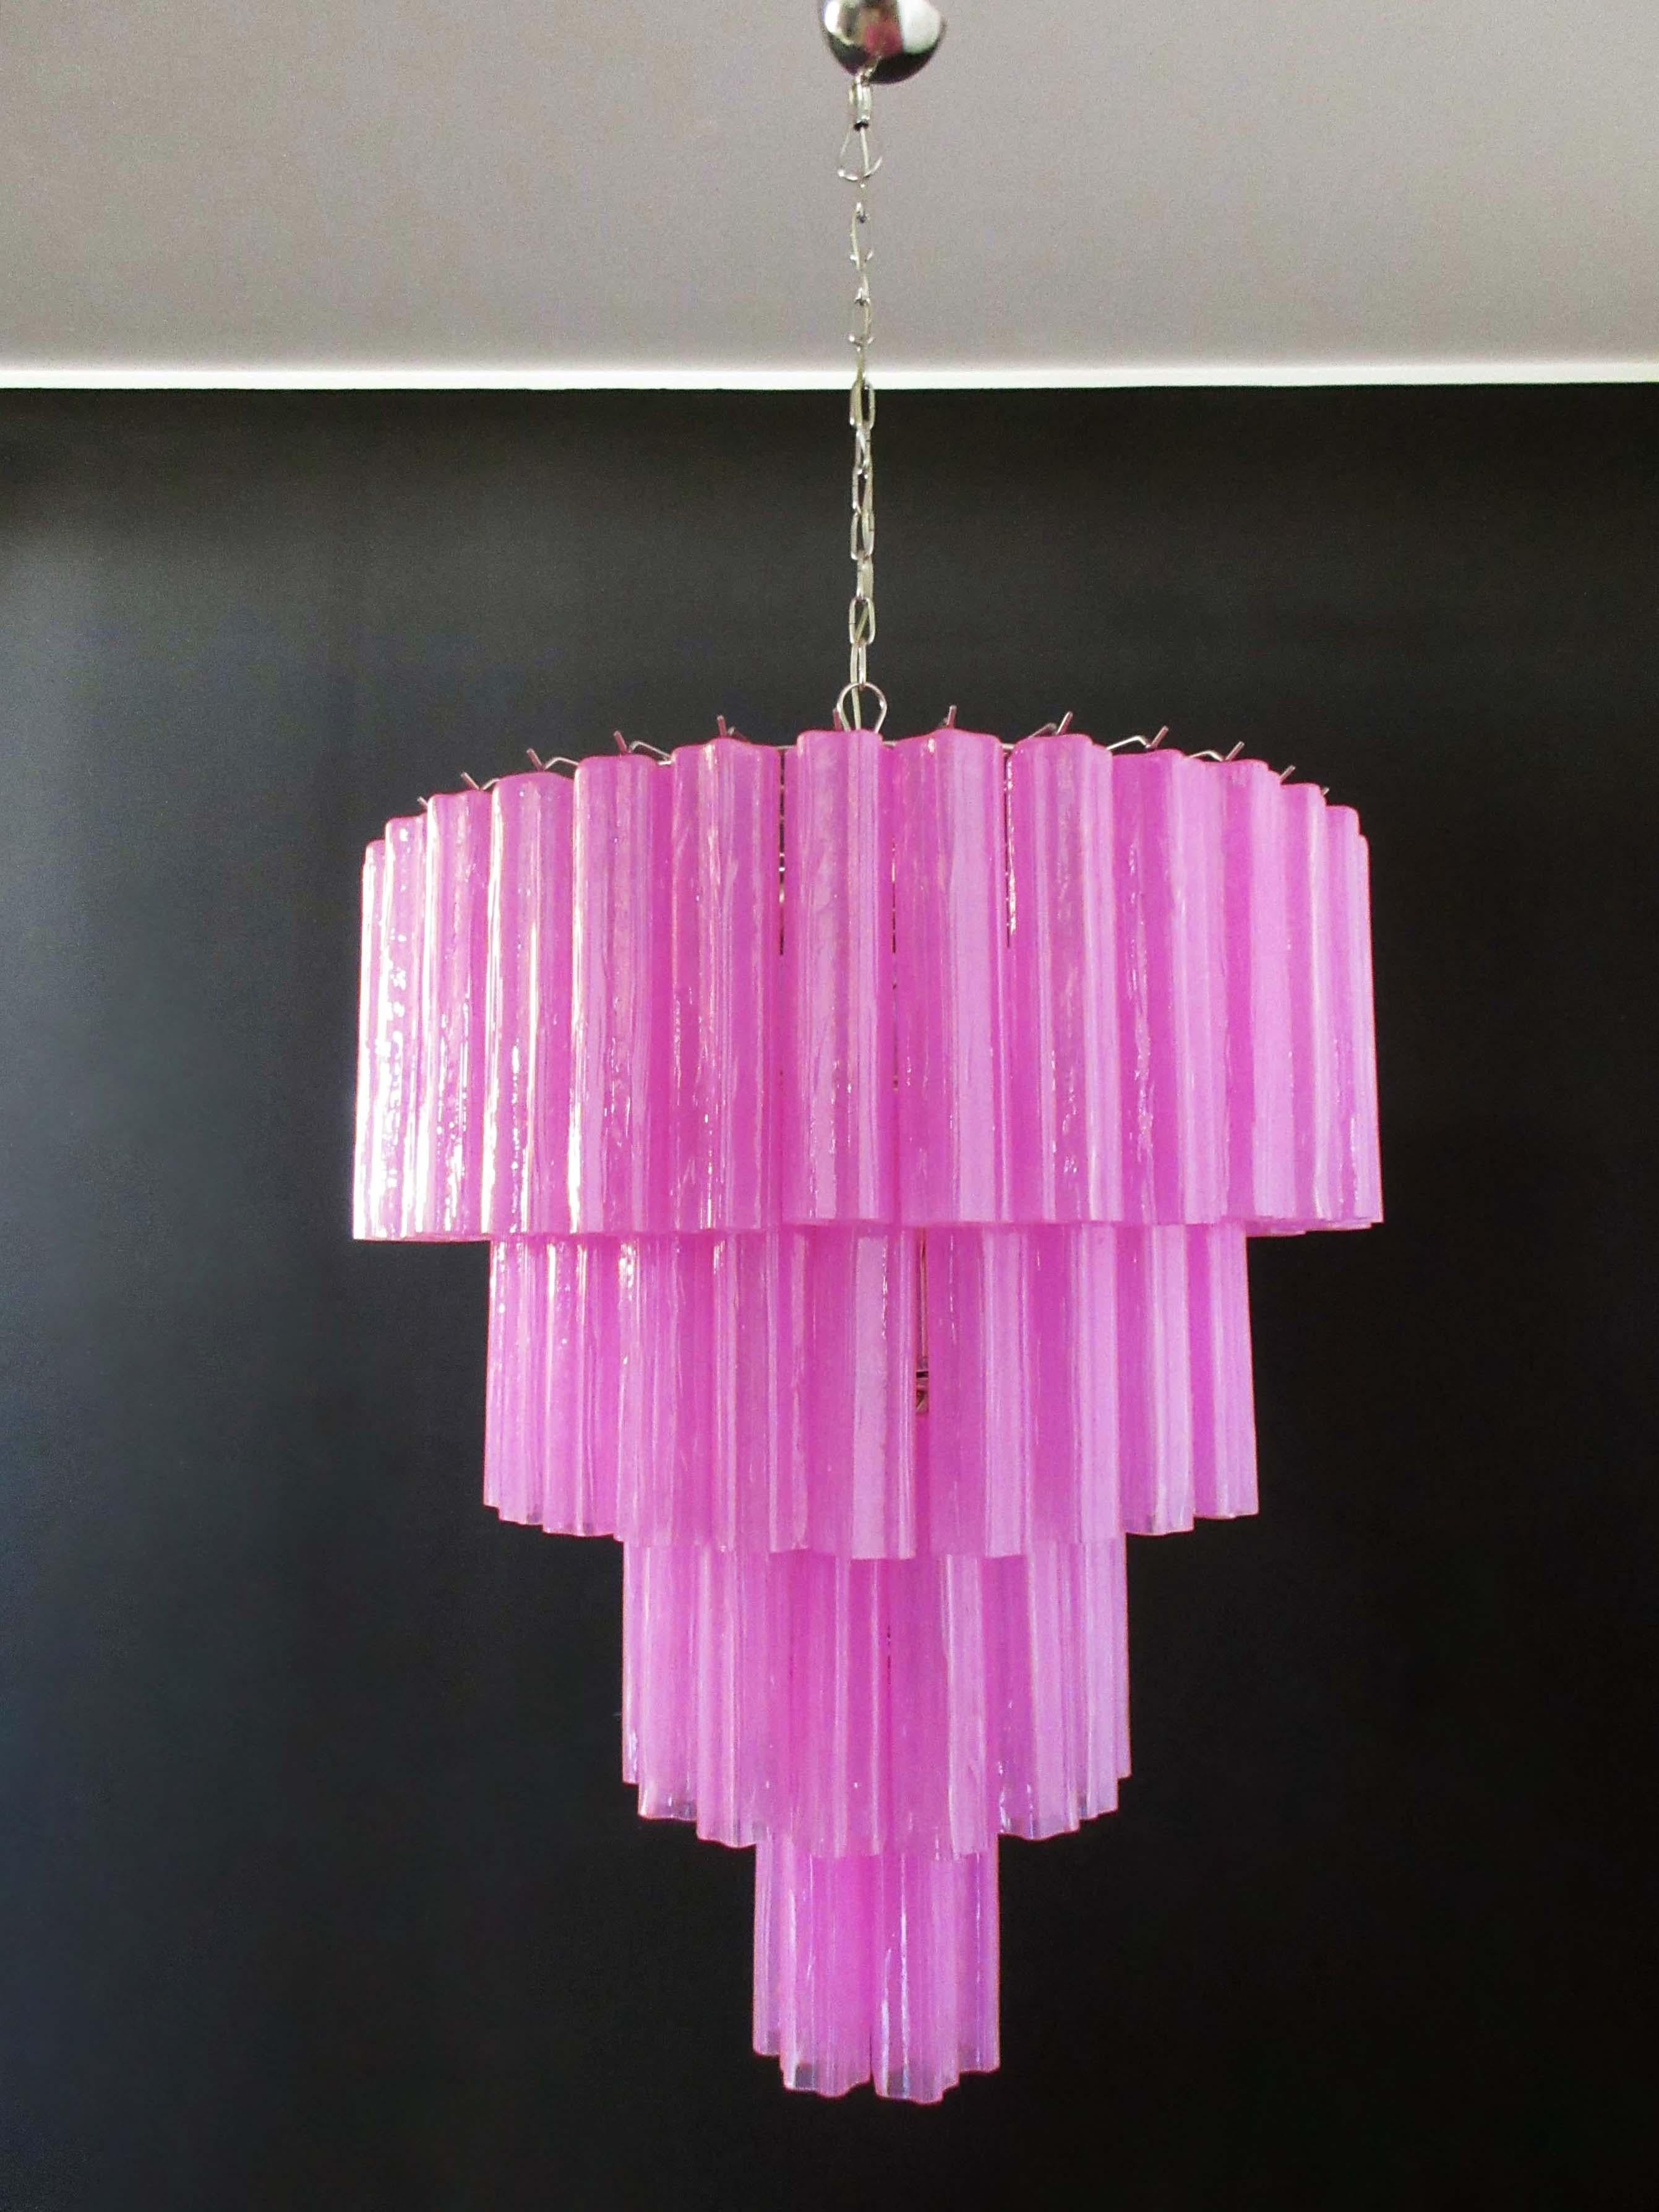 Mid-Century Modern Huge Vintage Murano Glass Tiered Chandelier - 78 Glasses - Pink Fuxia Silk